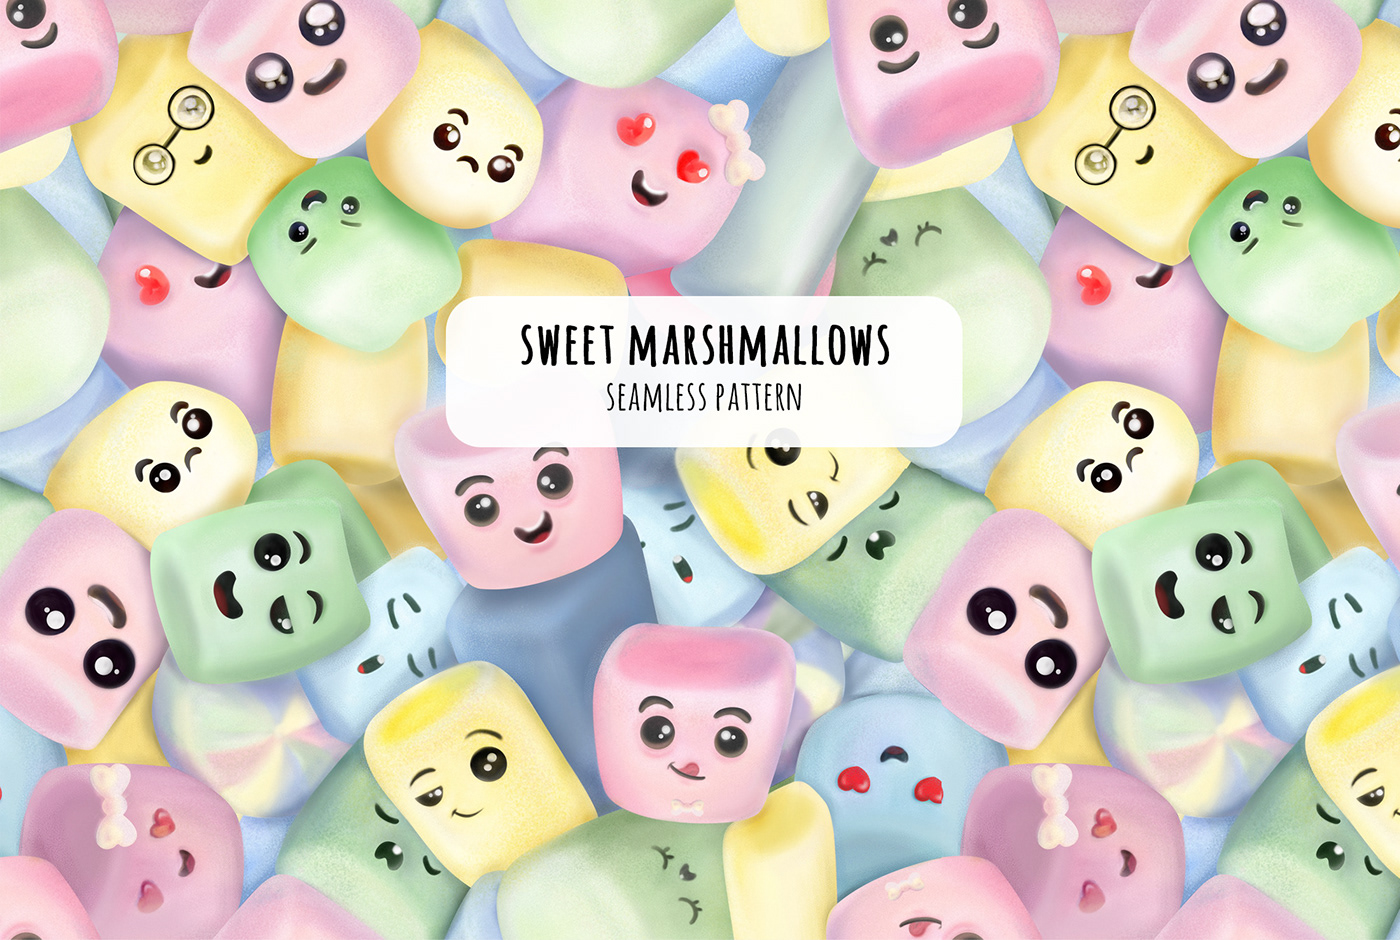 #Candy #emotion #illustration #marshmallow #packaging #pattern